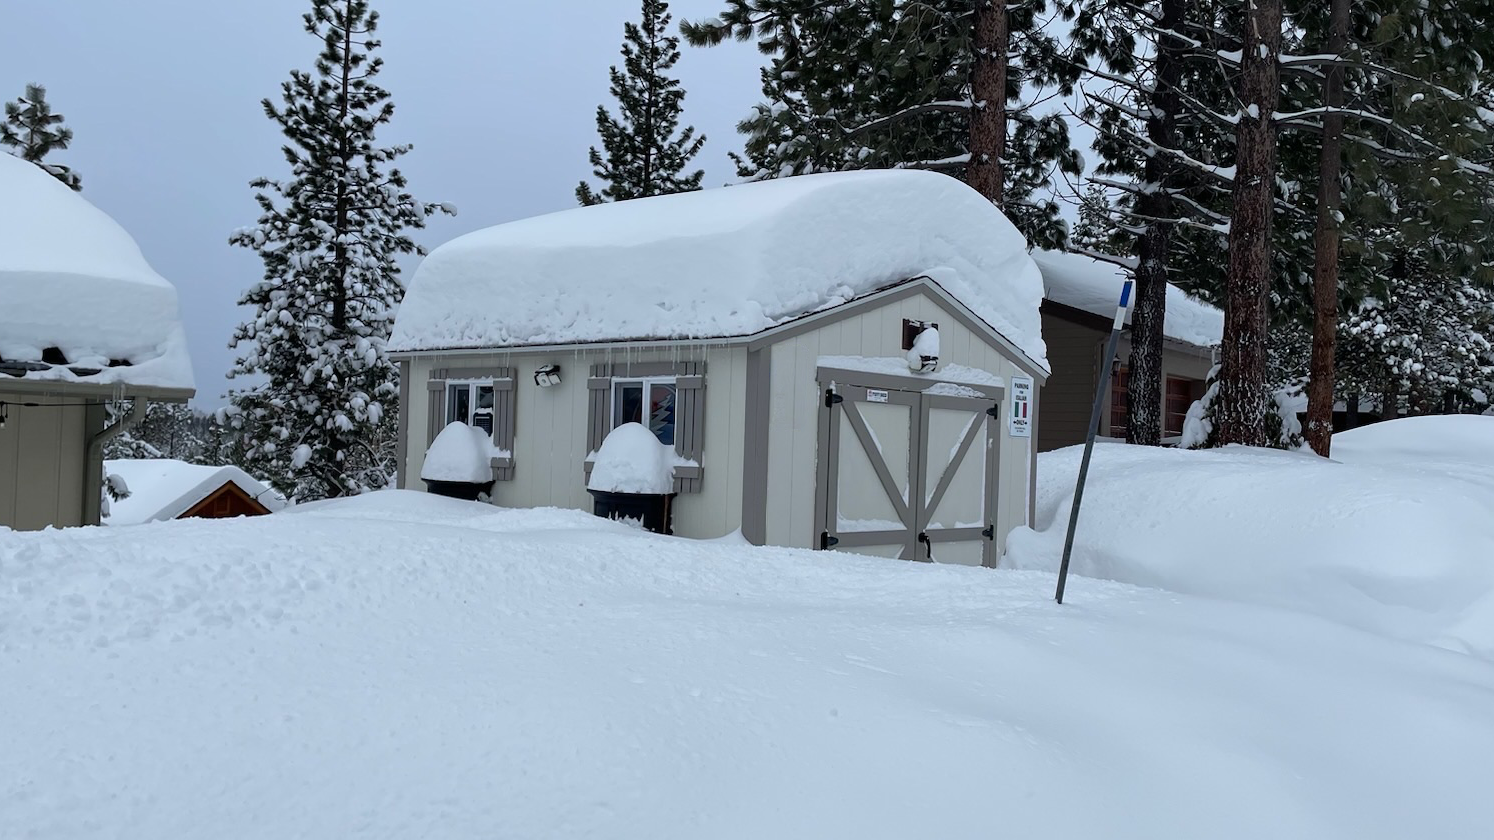 A Tuff Shed covered in snow